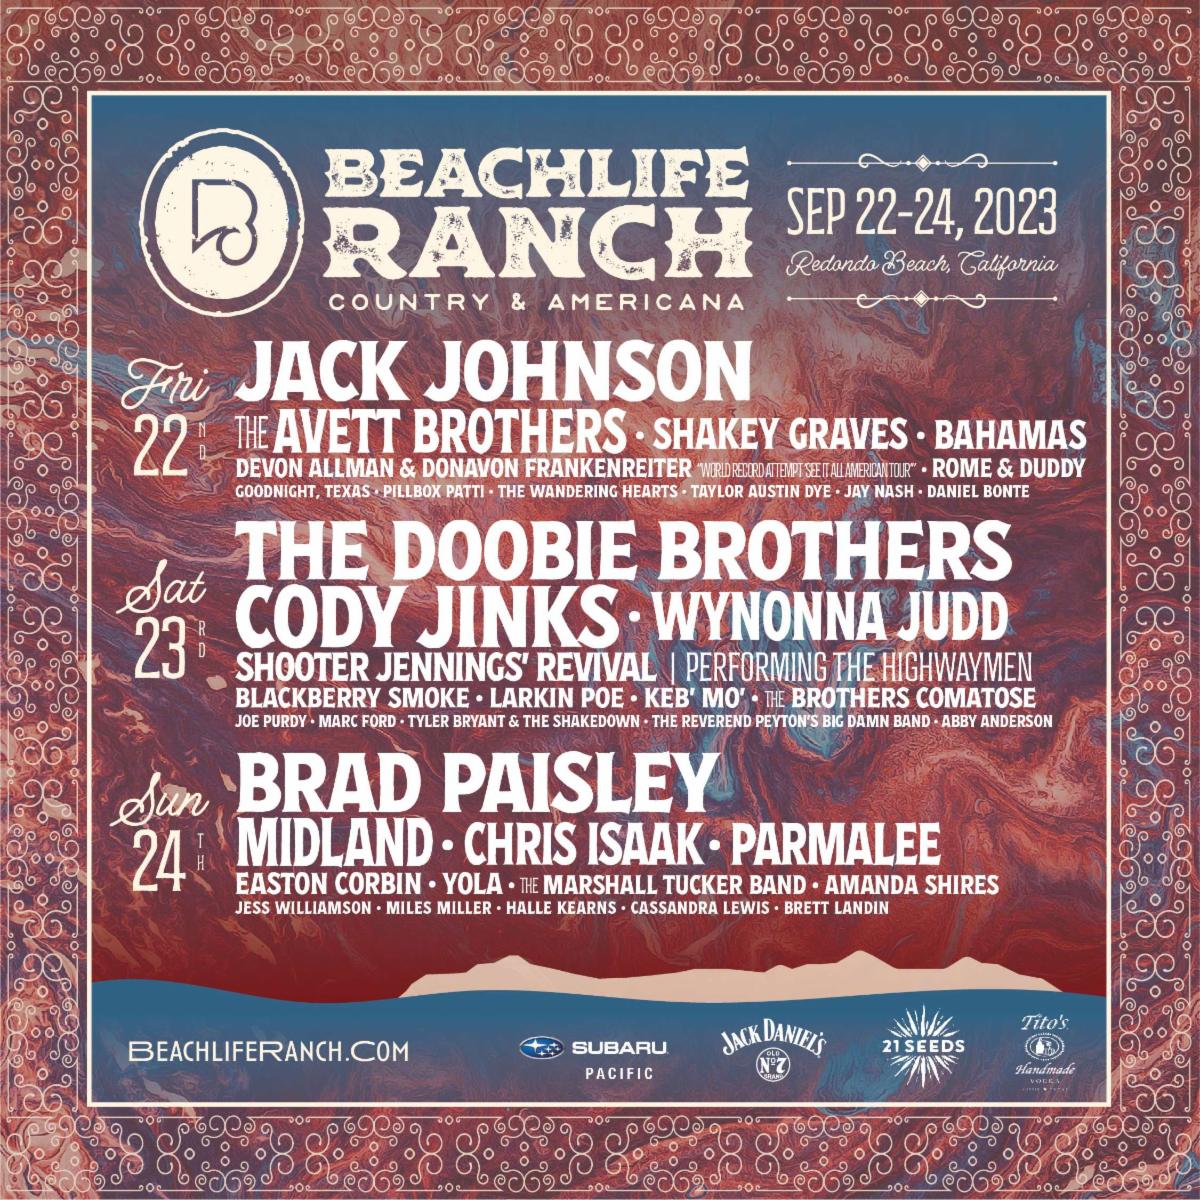 BEACHLIFE RANCH TO SUPPORT VETERANS & LOCAL COMMUNITY AND MAUI RELIEF EFFORTS